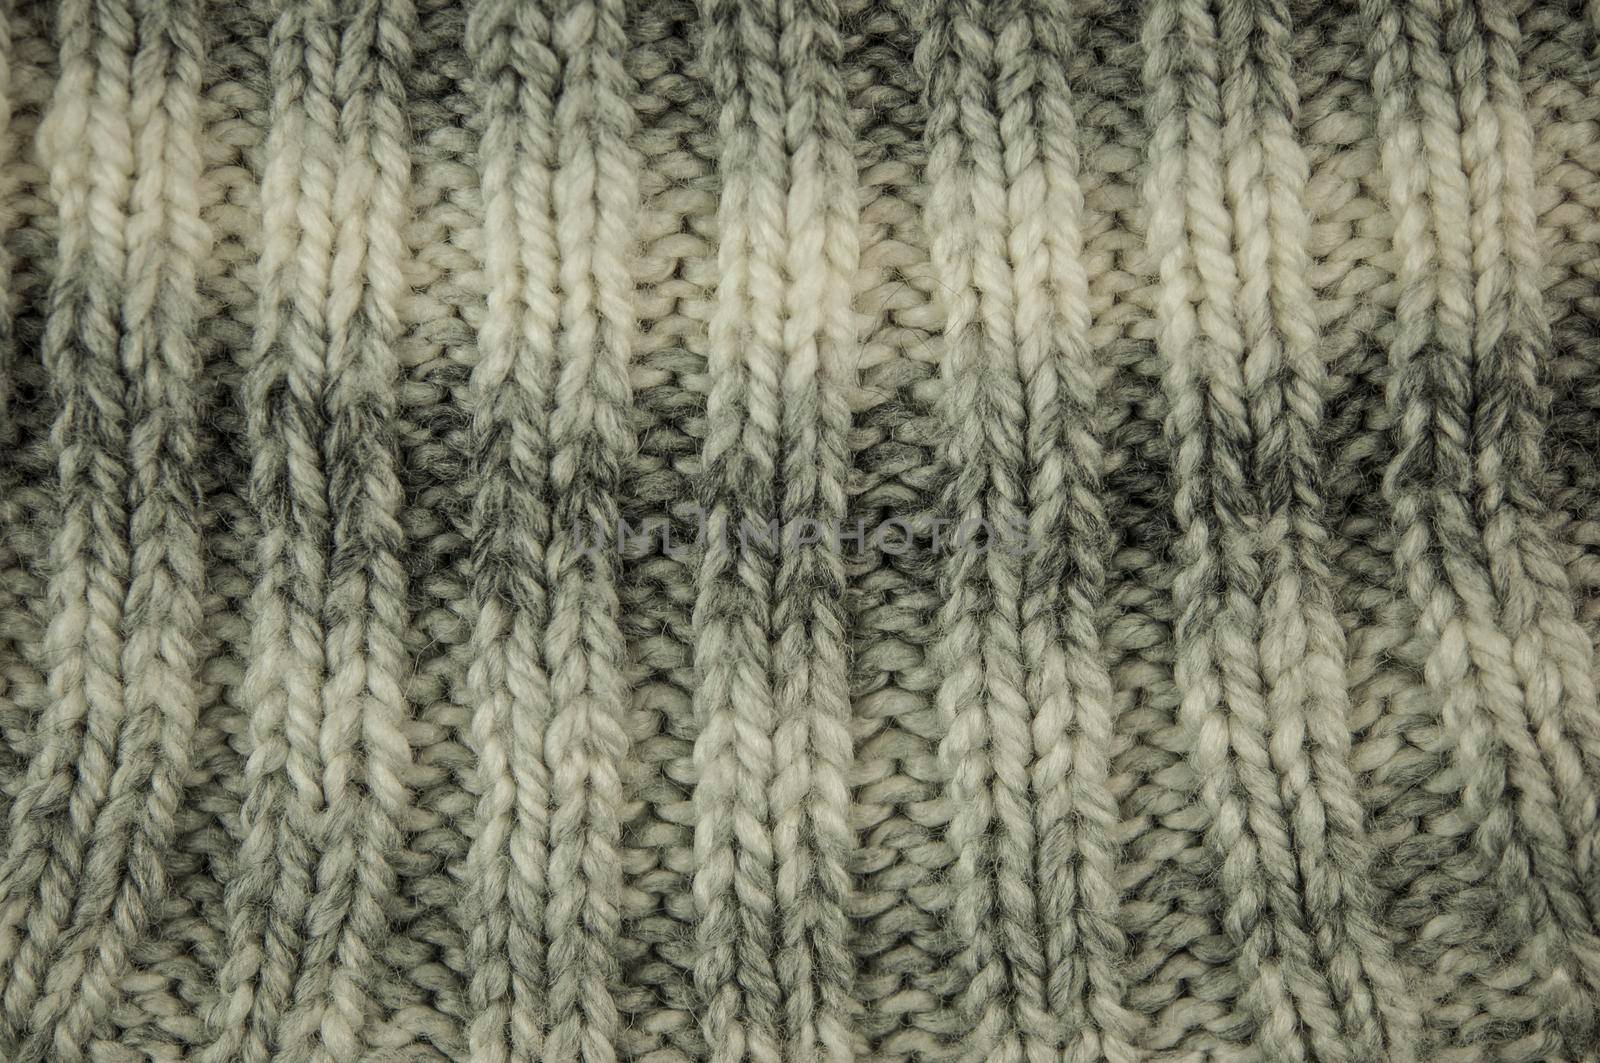 It is knitting wool texture for pattern and background.